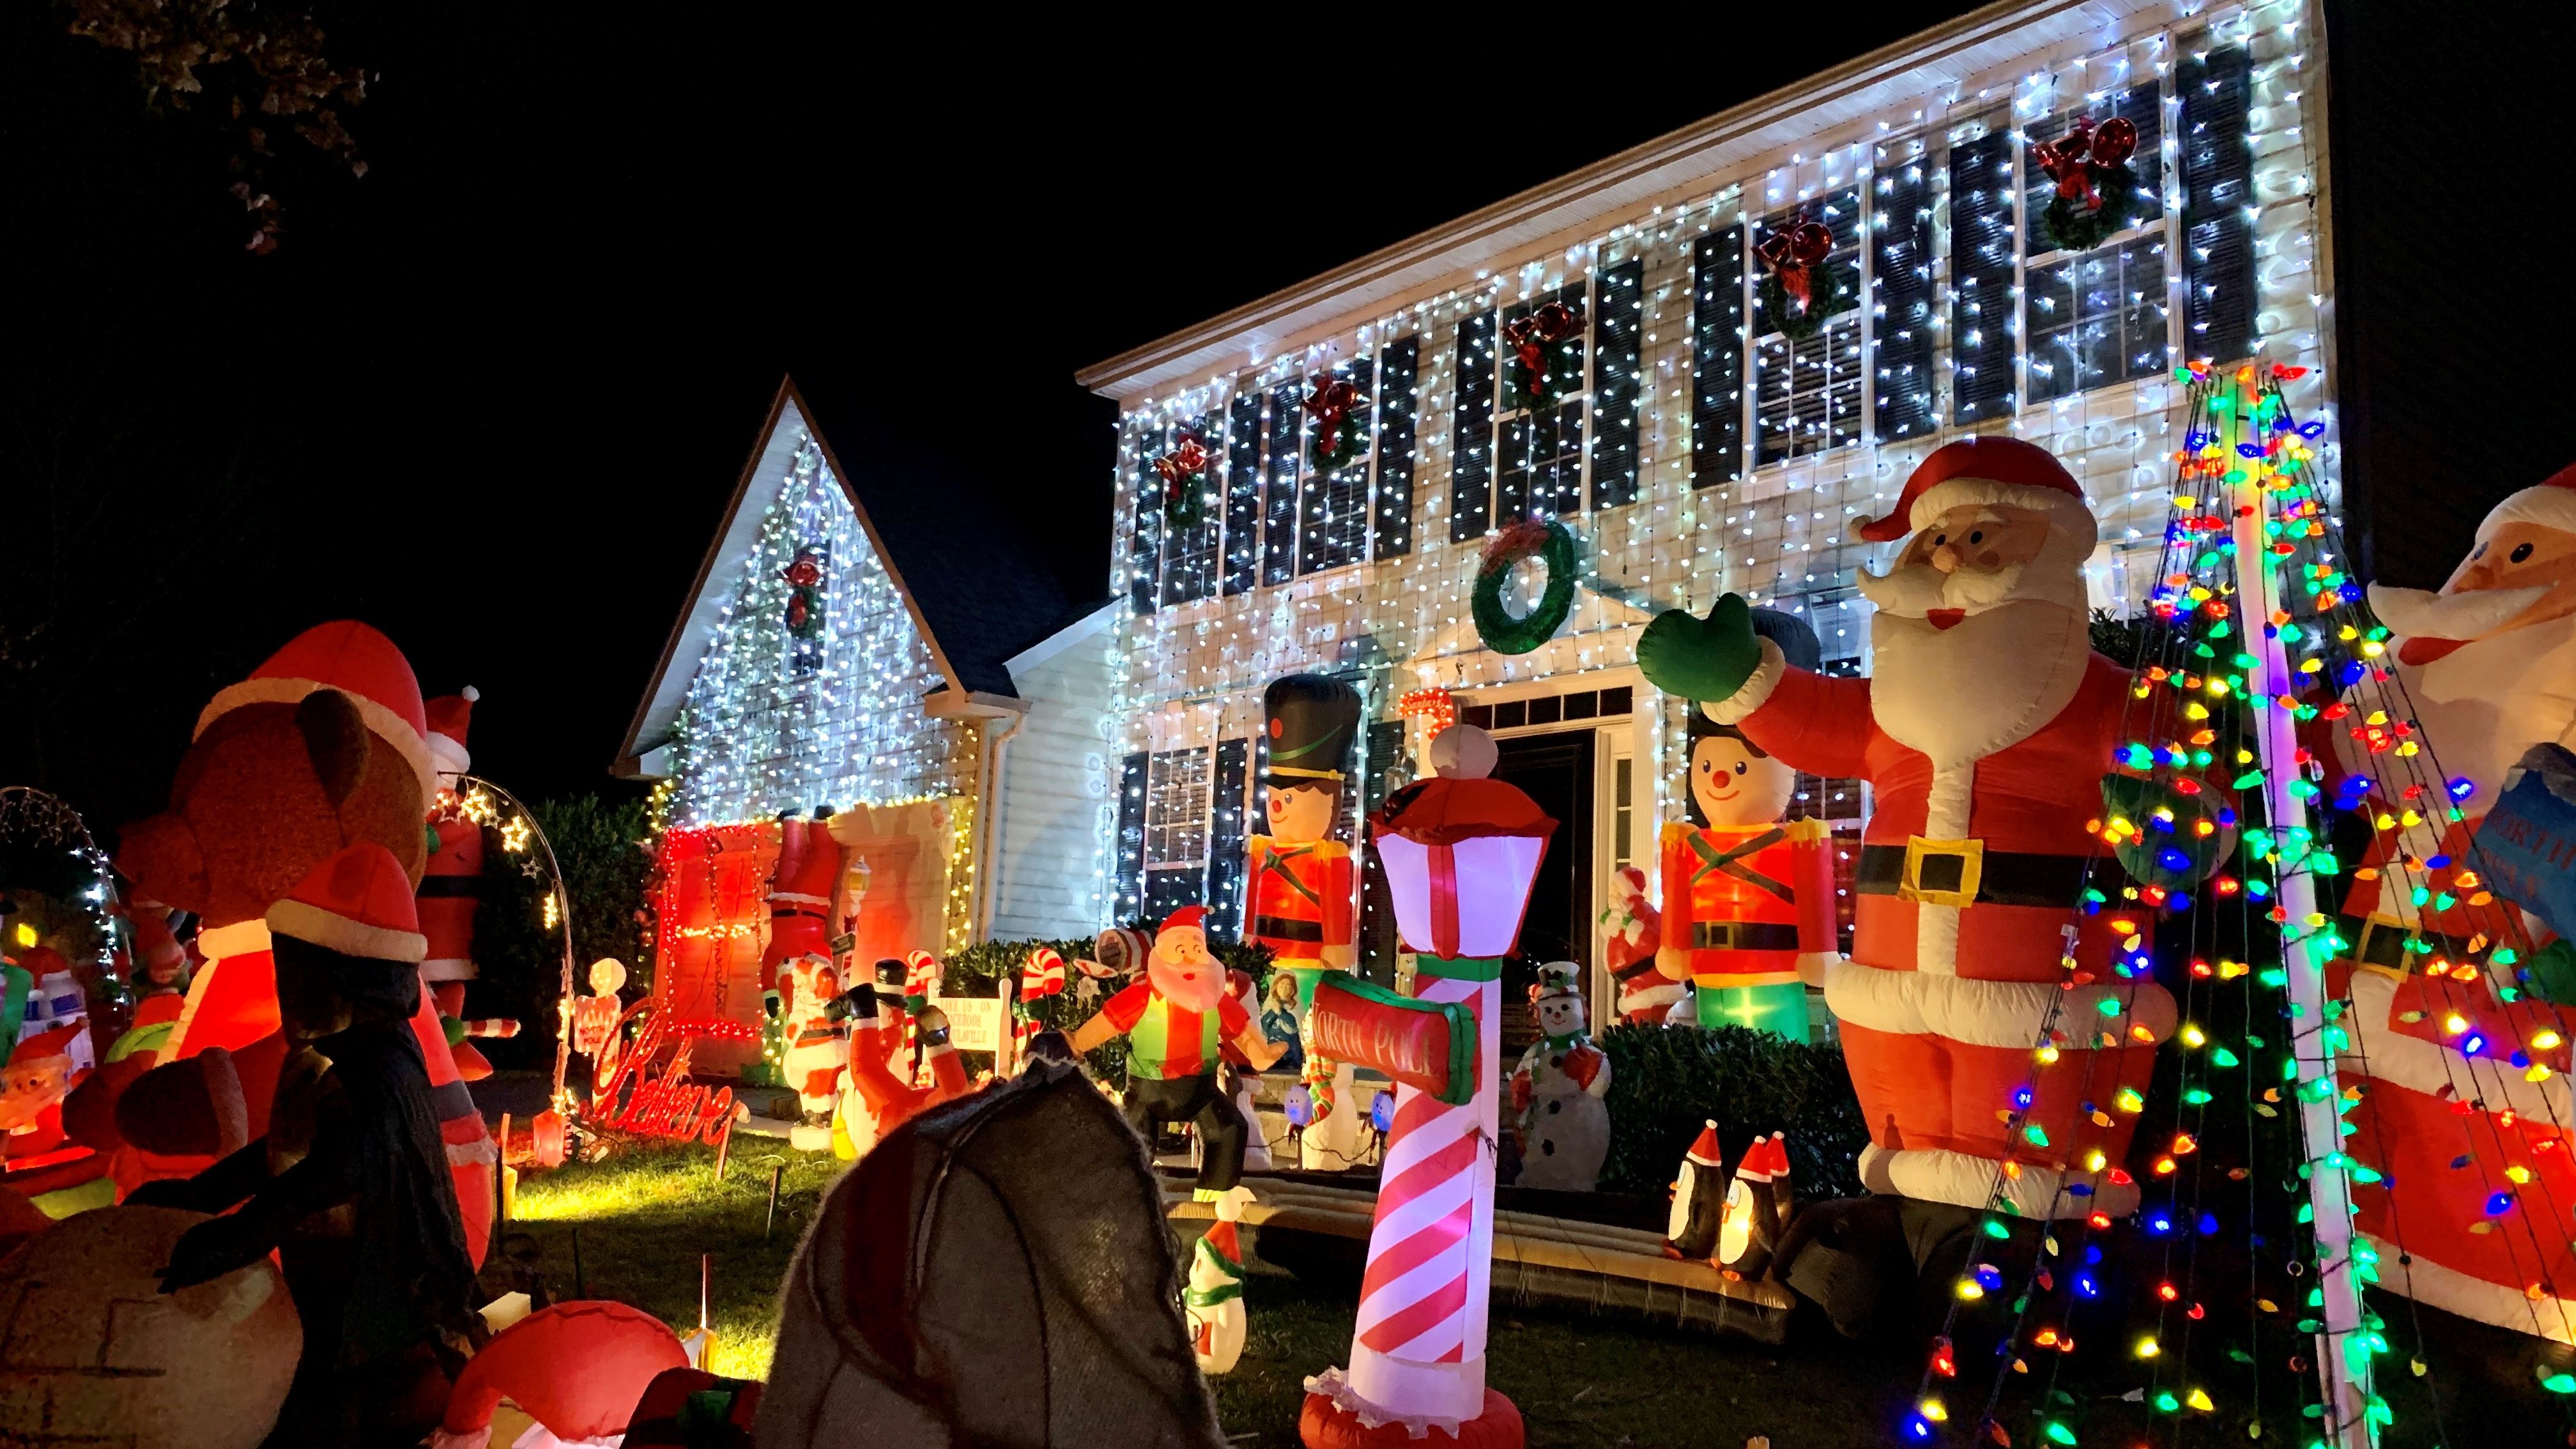 How inflatable holiday decorations took over the front yard ...